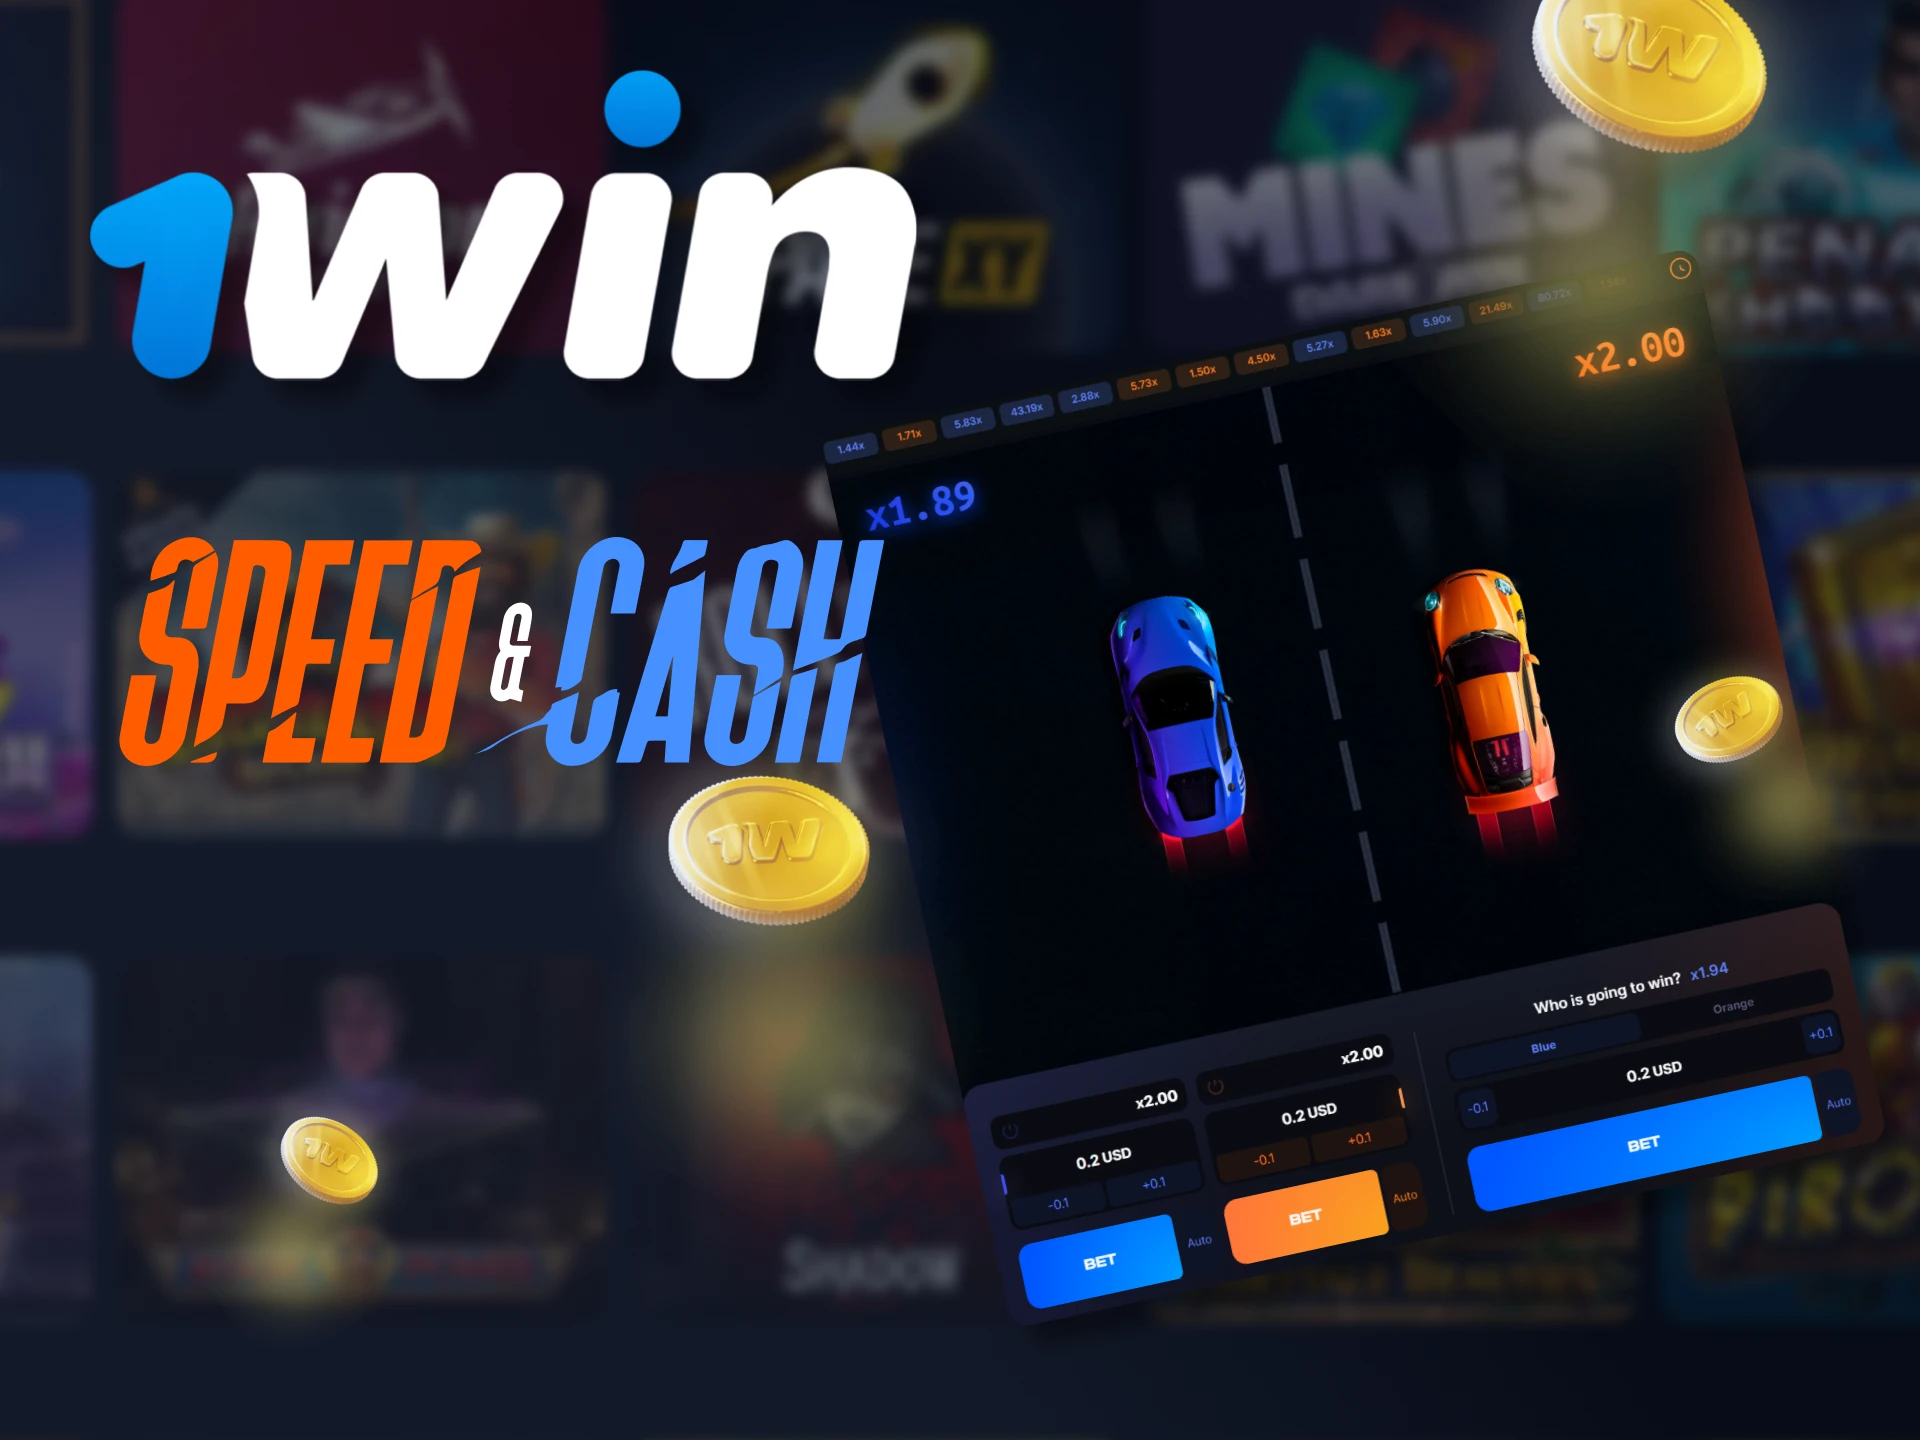 On 1Win, play the game Speed and Cash.